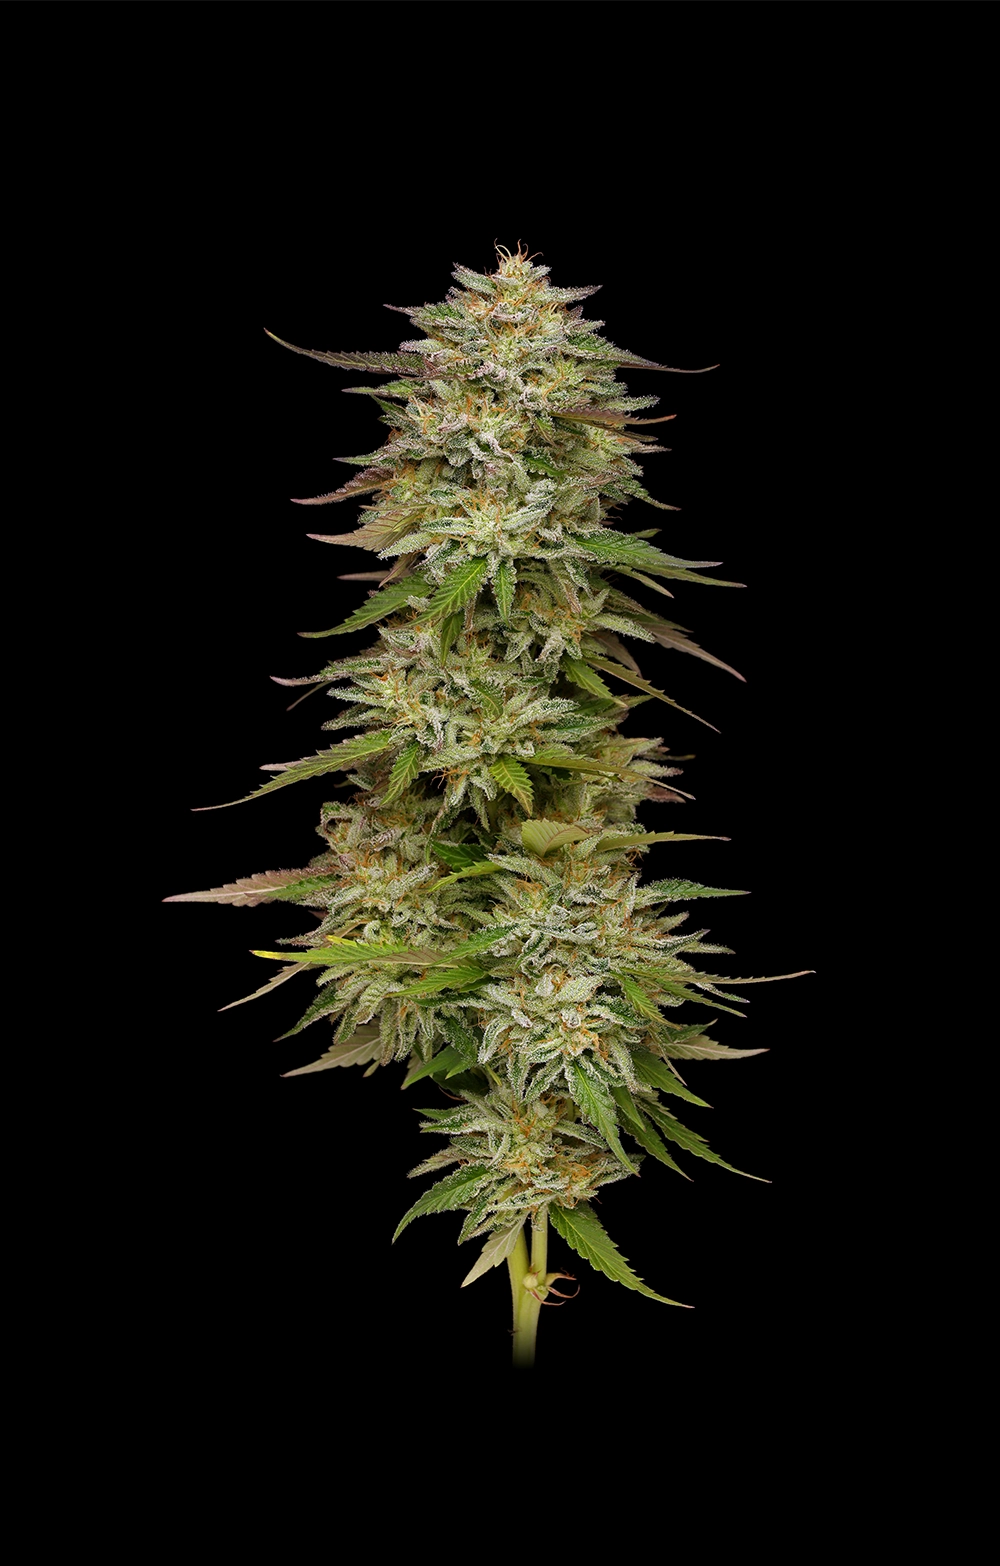 Golden Sands (Humboldt Seed Company) Cannabis Seeds